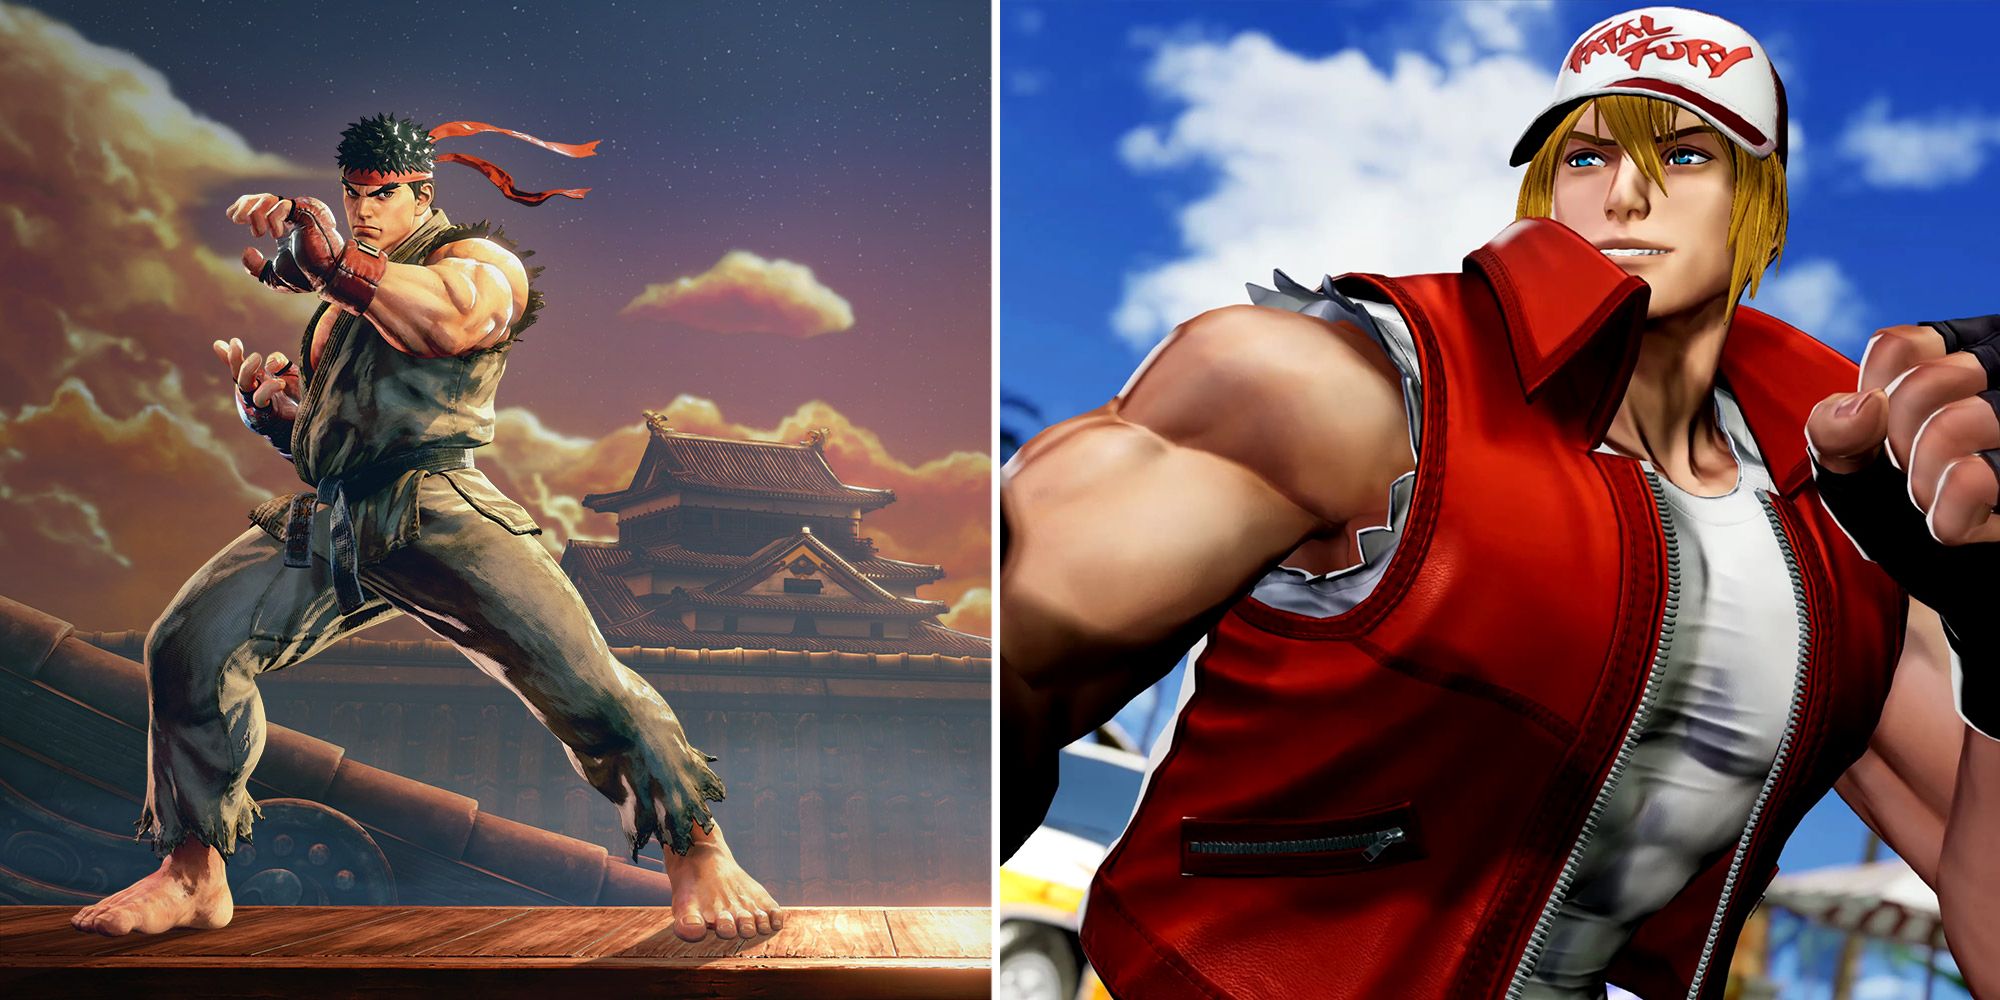 Which is more complex, The King of Fighters or Street Fighter? - Quora